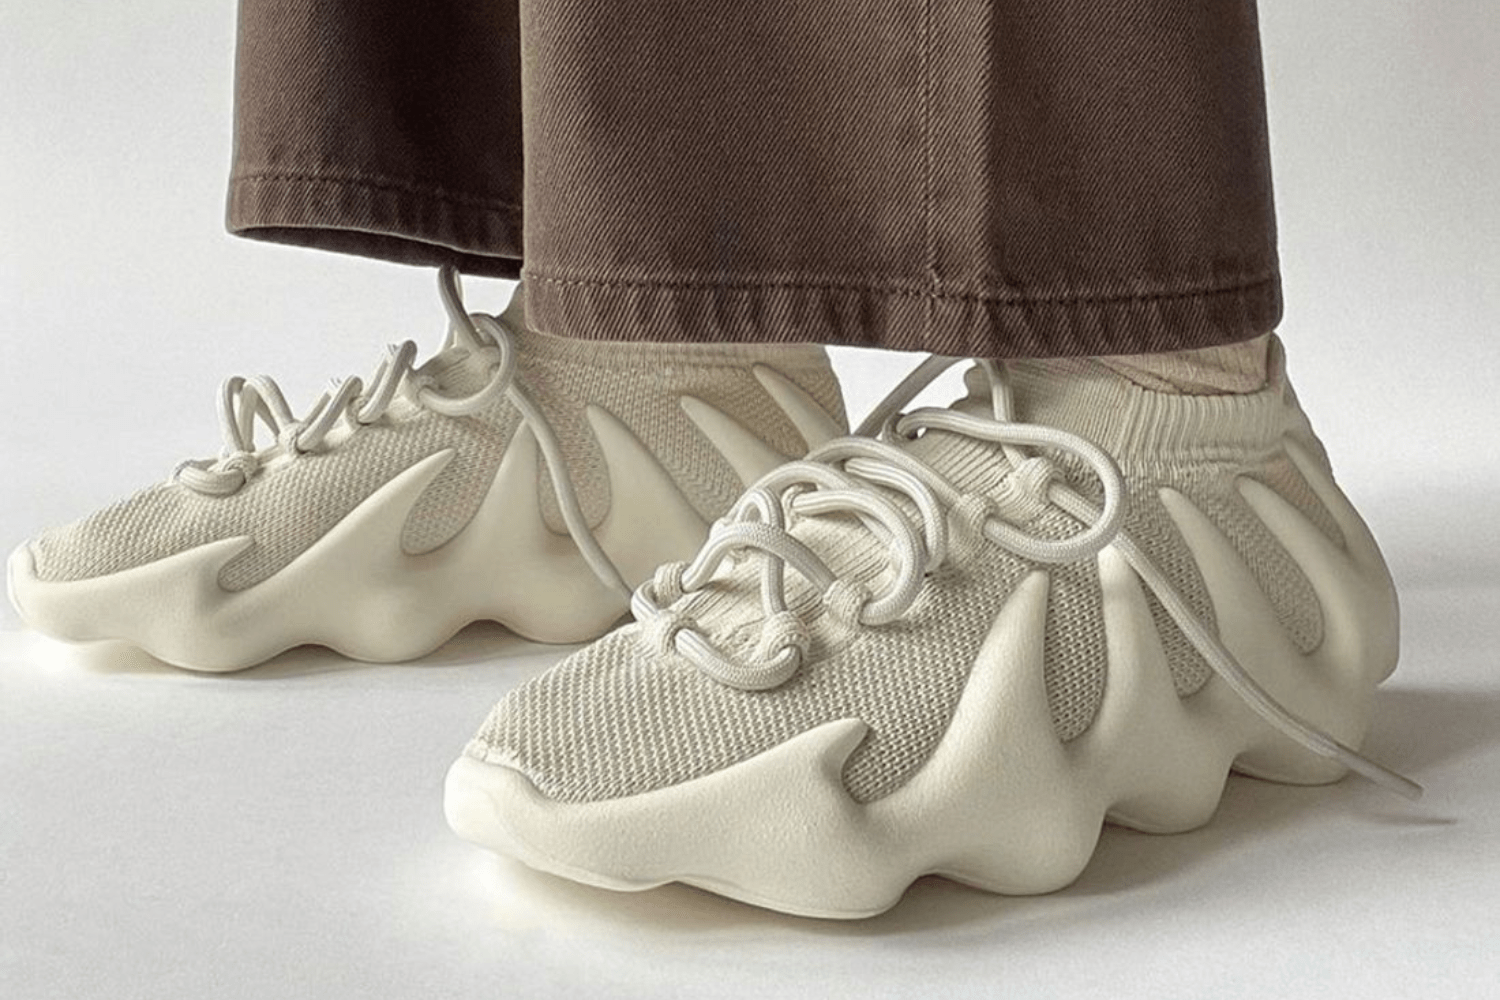 Why Ugly Sneakers are Trending in 2023